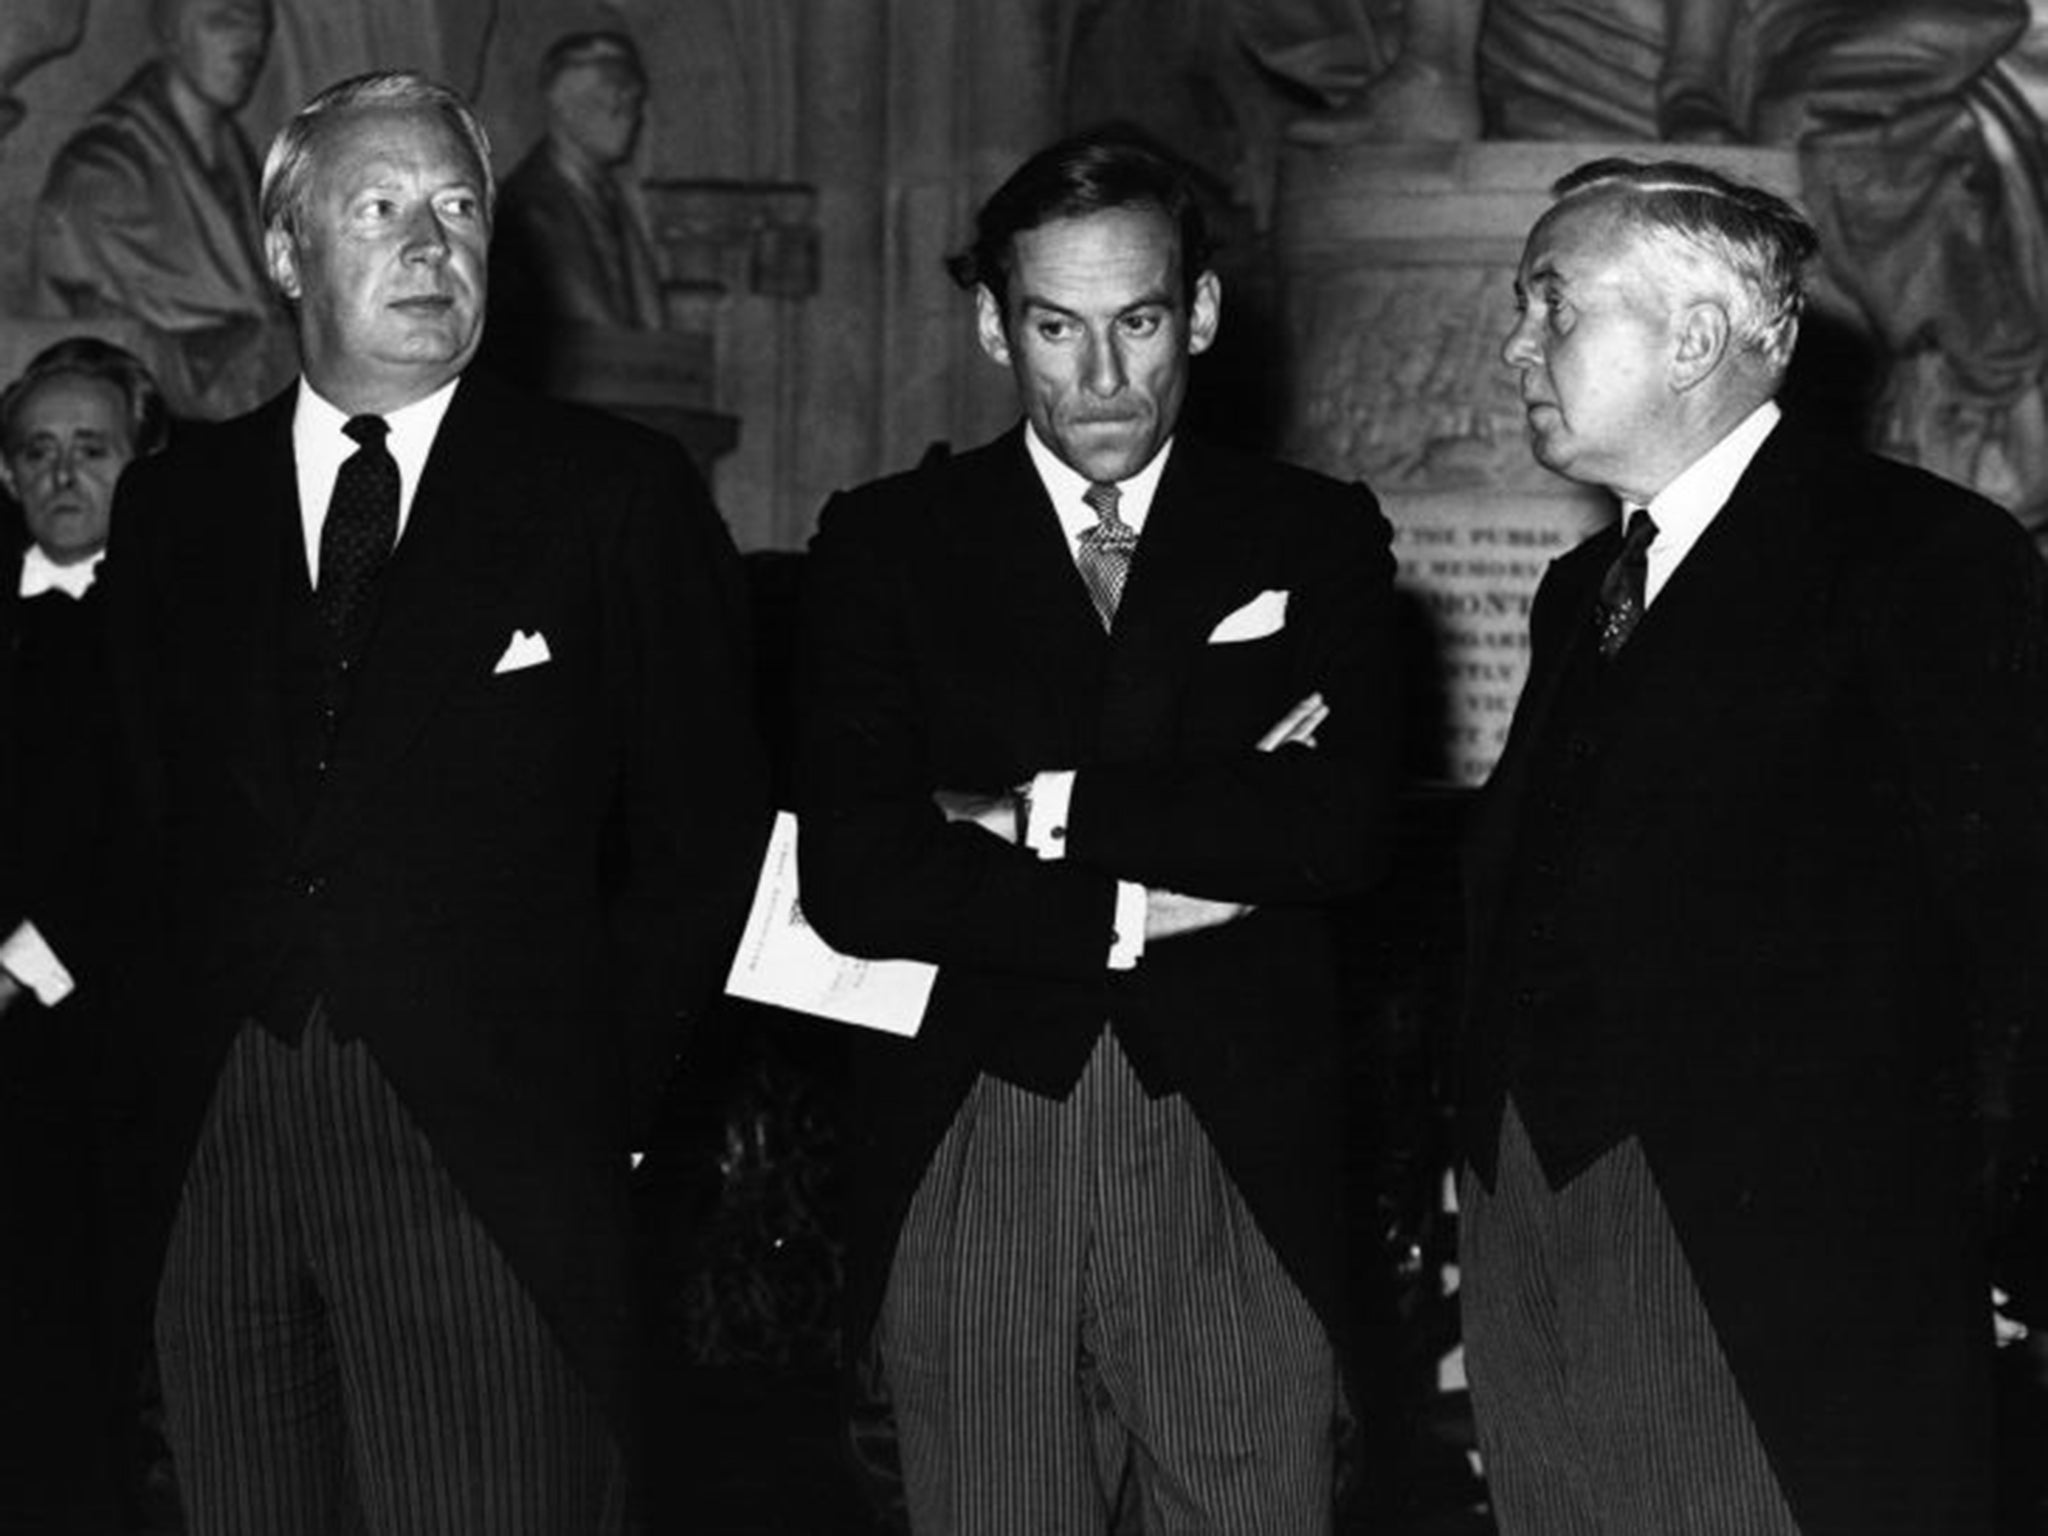 Malicious rumours were also circulated about the private lives of former prime ministers Harold Wilson